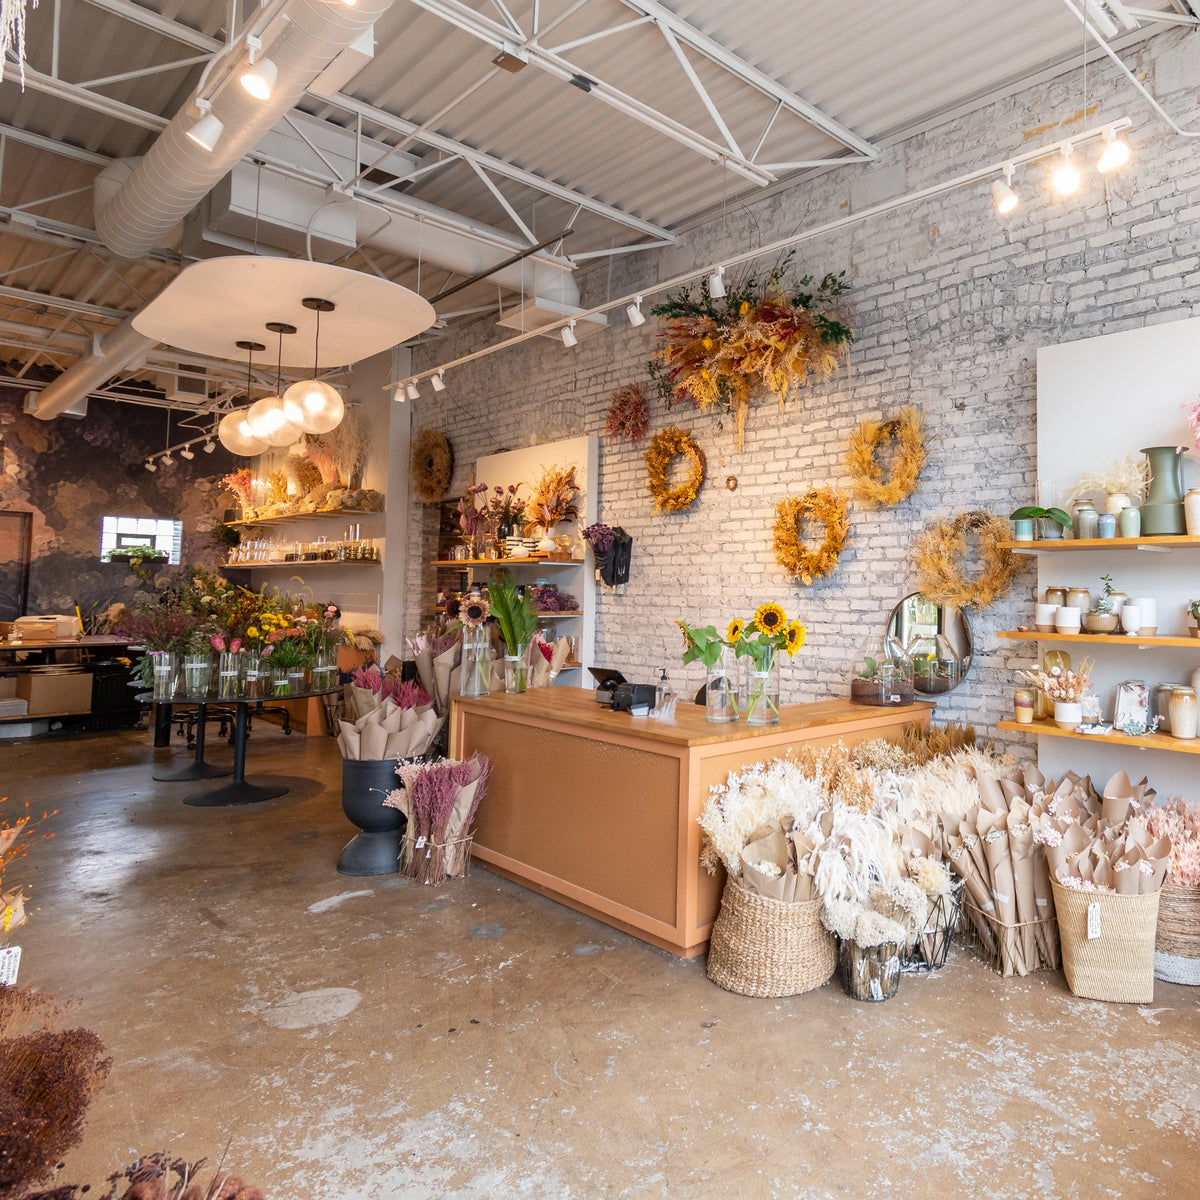 Photo of interior of Sprout Home's floral store, showing white brick wall, wreaths, and cash register